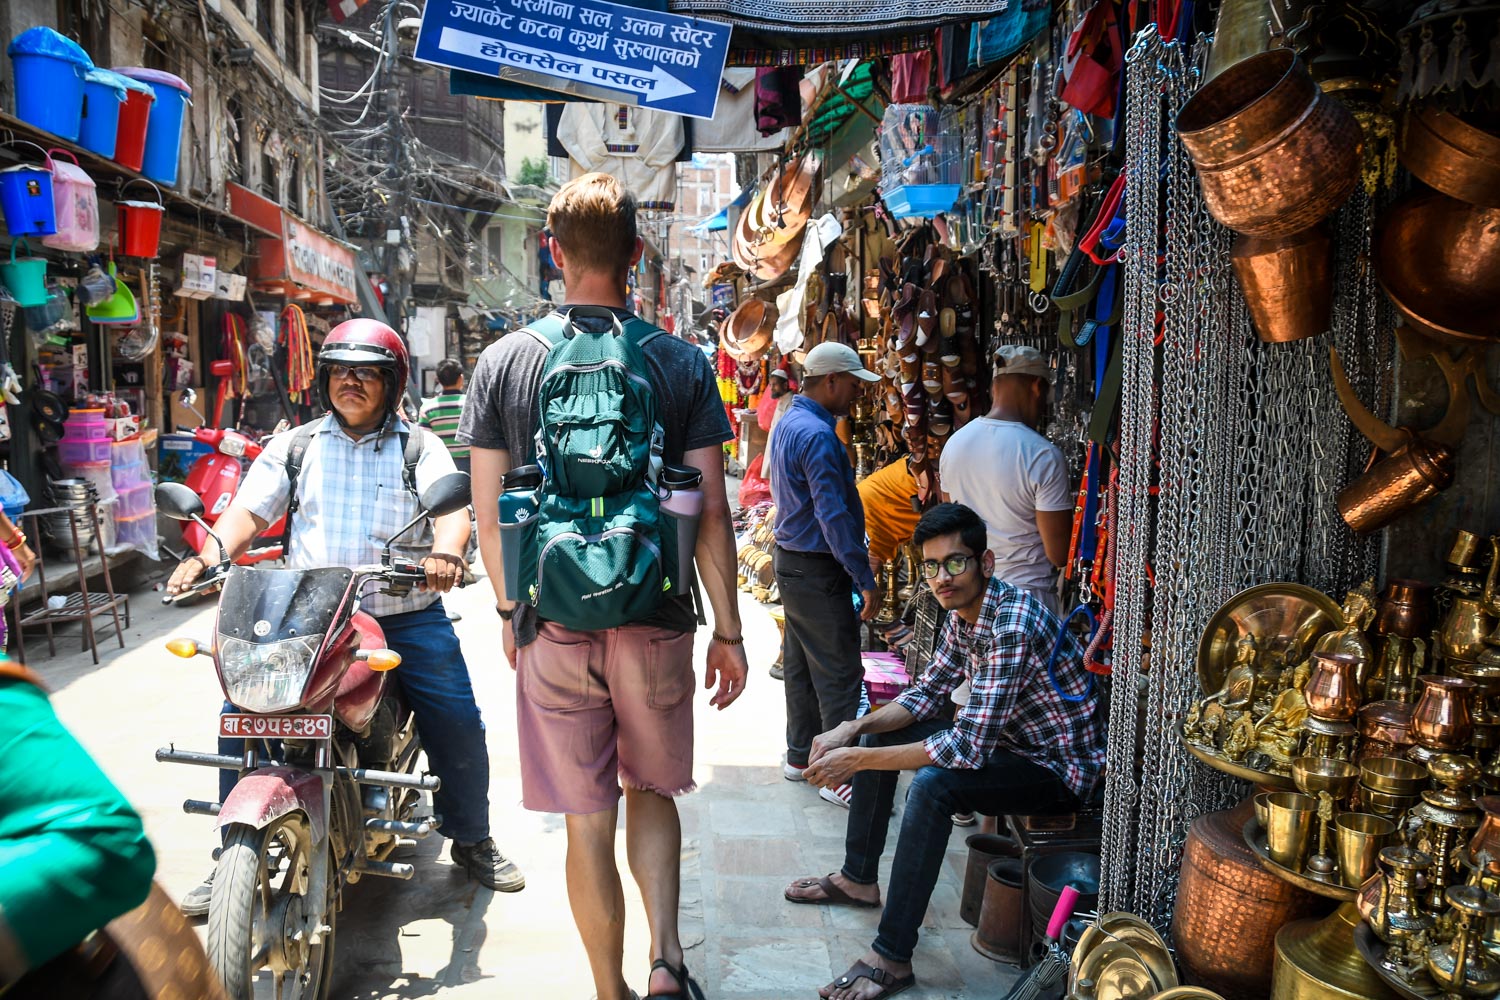 Things to Do in Nepal Shopping markets Street